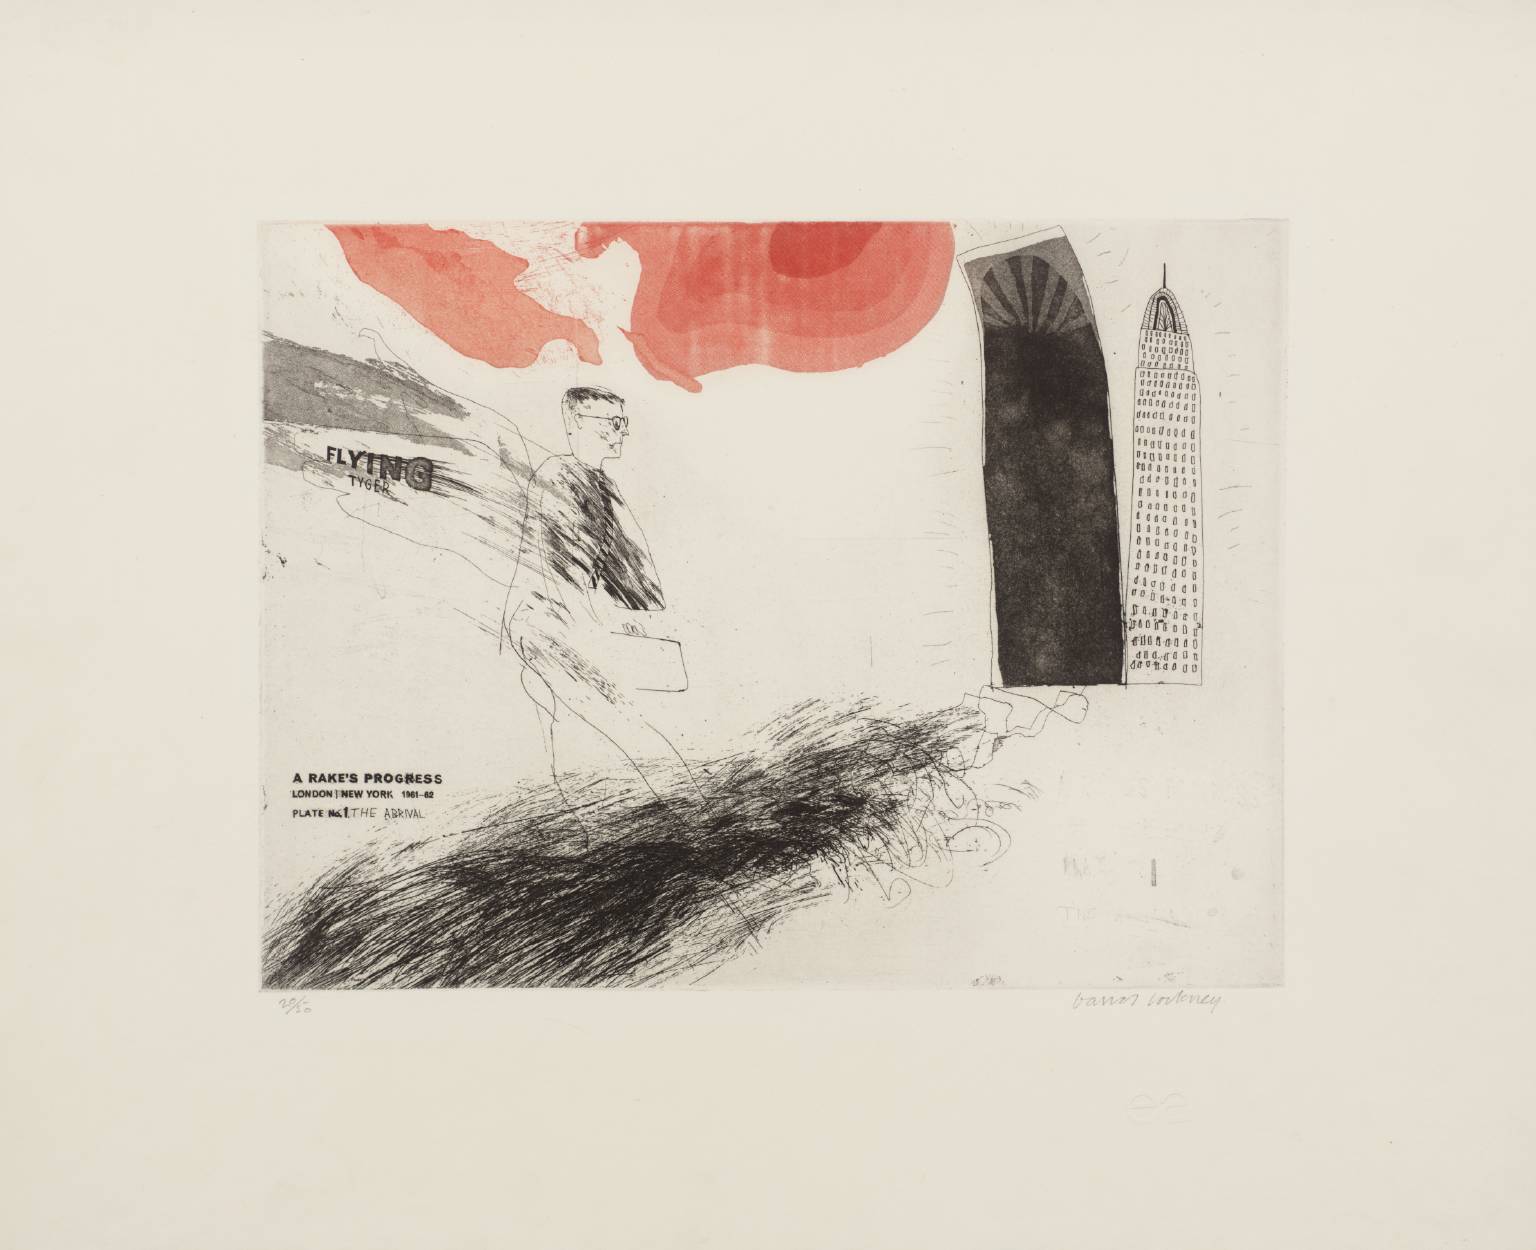 David Hockney, “The Arrival” From A Rake’s Progress, 1961-63 - Etching Edition of 50.jpg